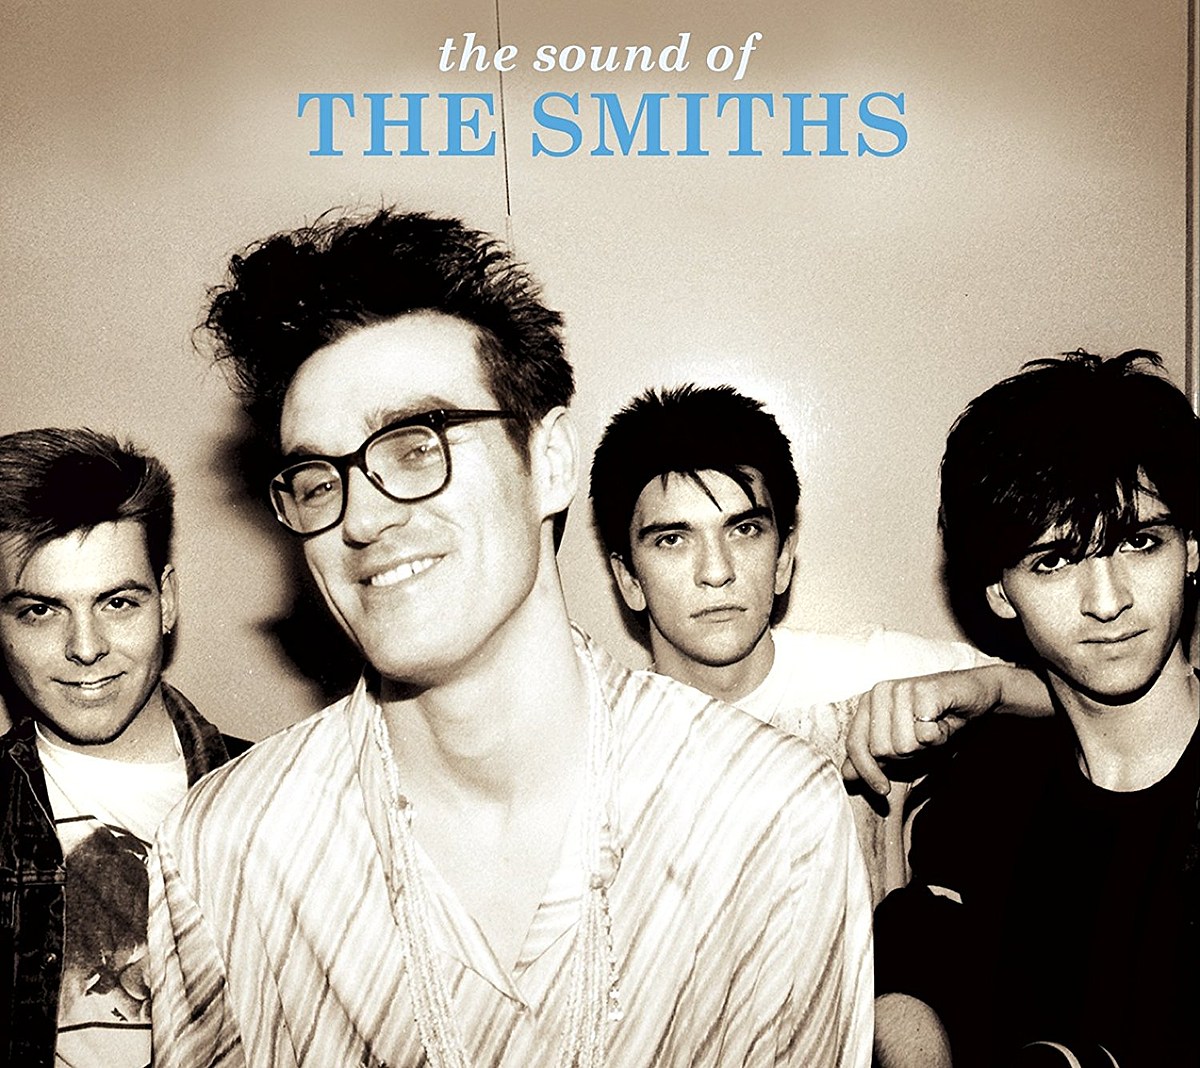 Smiths members reuniting for “Classically Smiths” orchestral shows